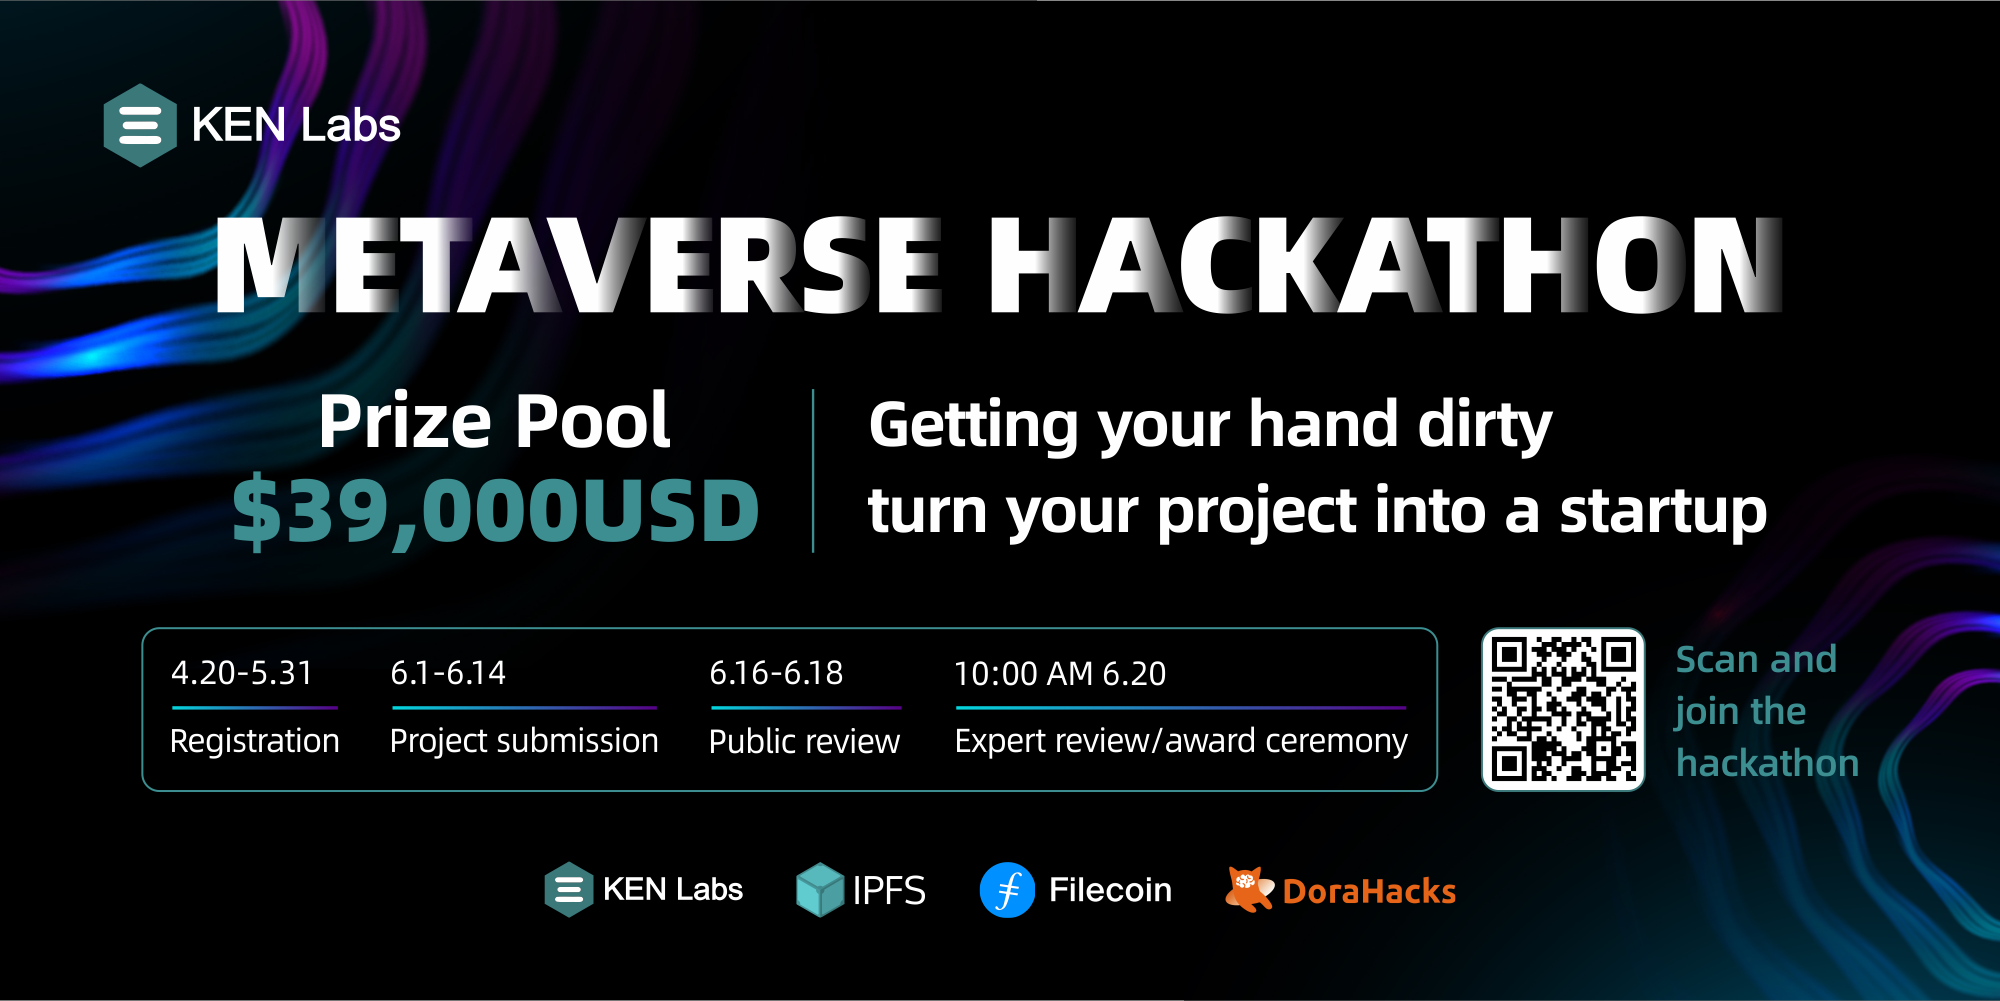 Metaverse Hackathon Is Live on DoraHacks with $39K in Prizes!